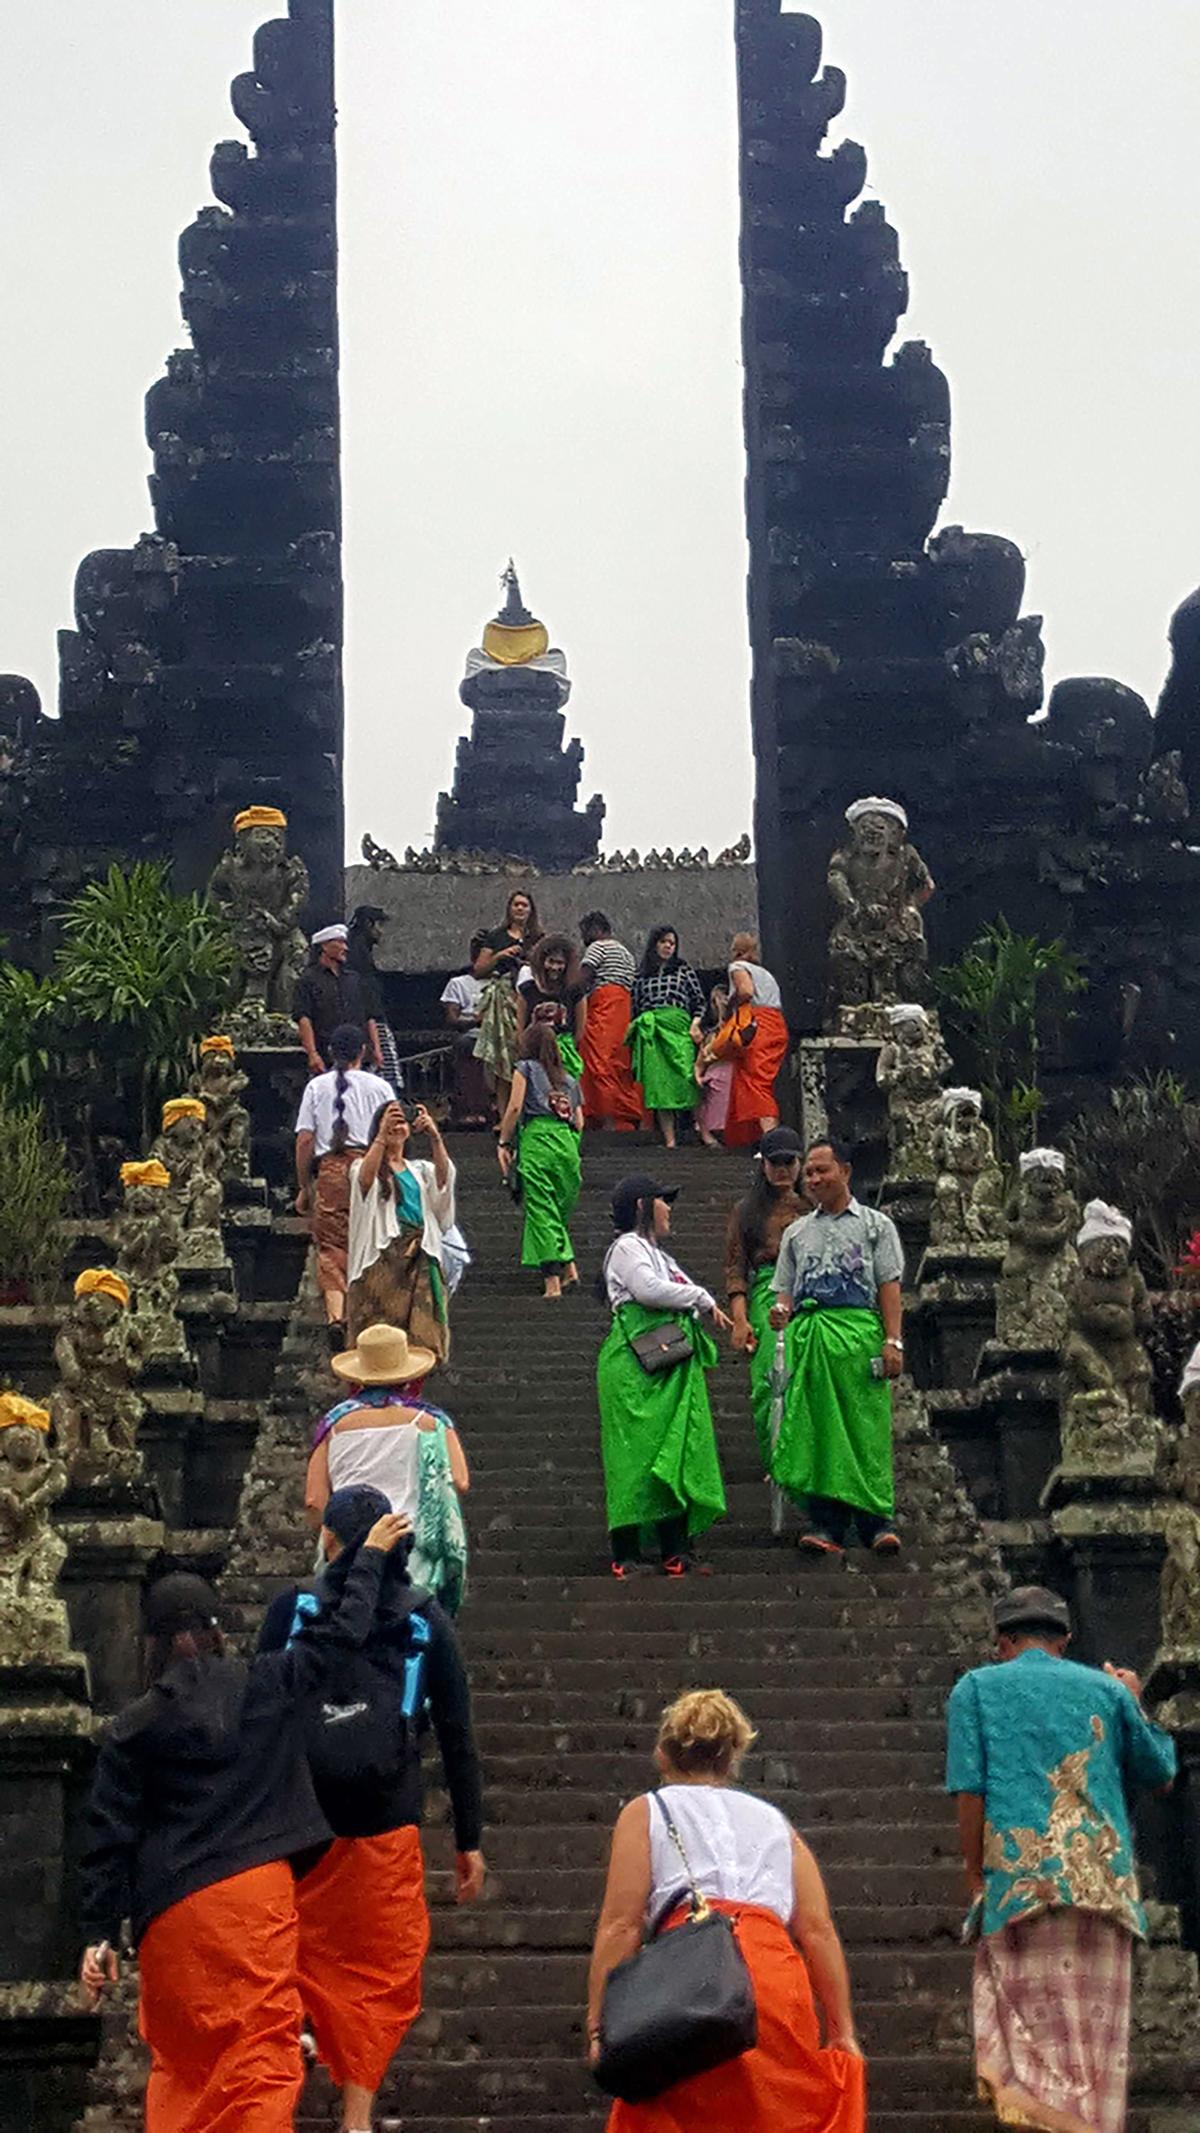 To visit a temple in Bali, Indonesia, our group was given sarongs to wrap around our bare legs as a show of respect. This trip was booked through Best Single Travel. (Nancy Clanton/The Atlanta Journal-Constitution/TNS)